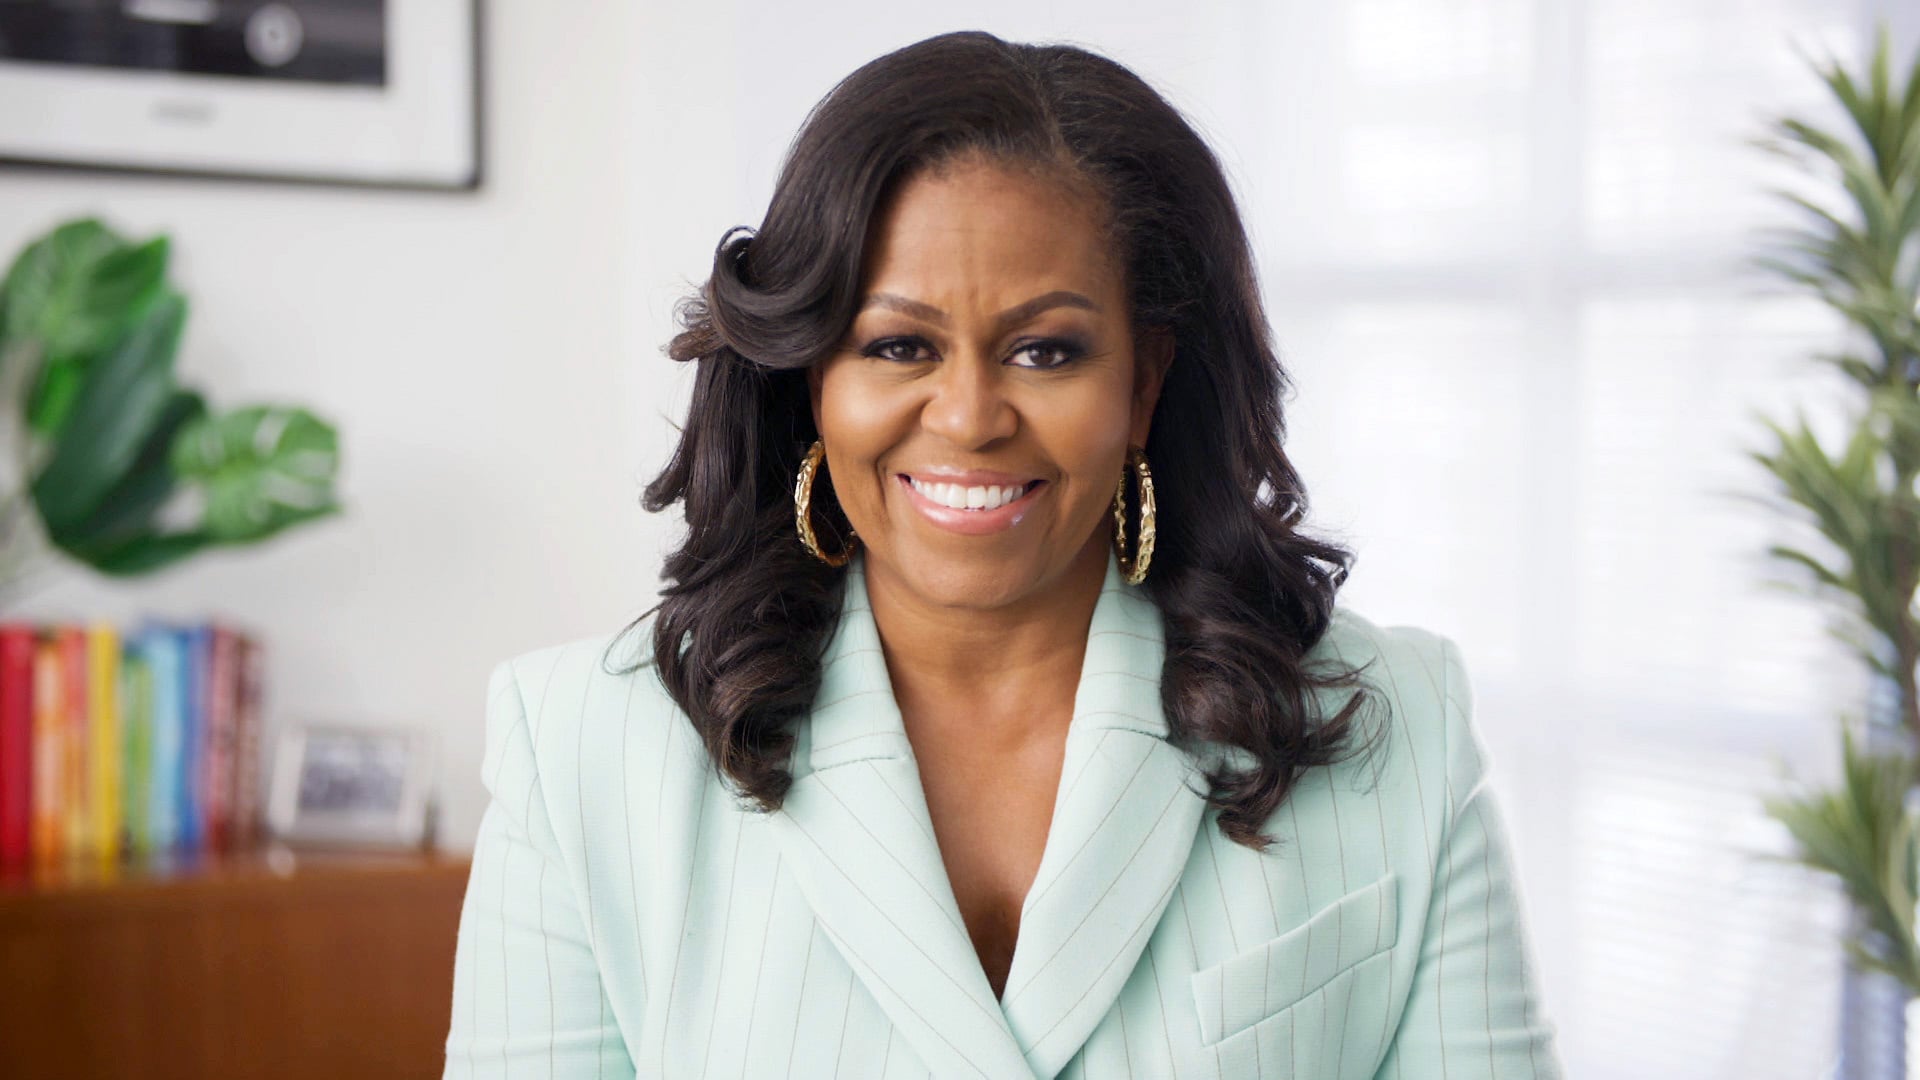 Michelle Obama presents at the 2021 NAACP Image Awards